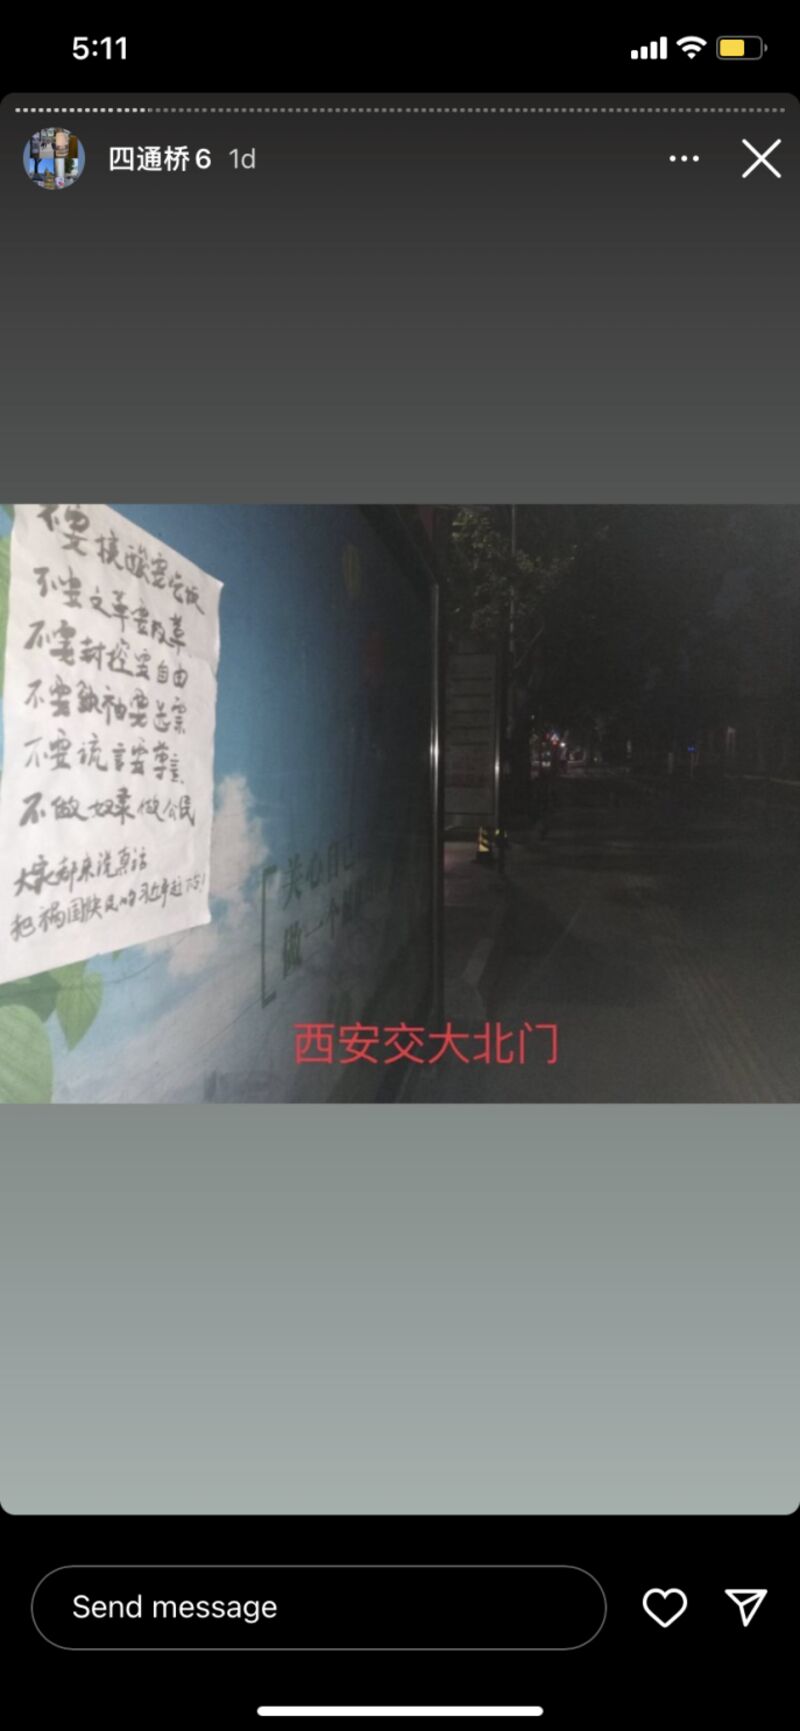 relates to Anti-Xi Slogans in Rare Beijing Protest Spread Within China